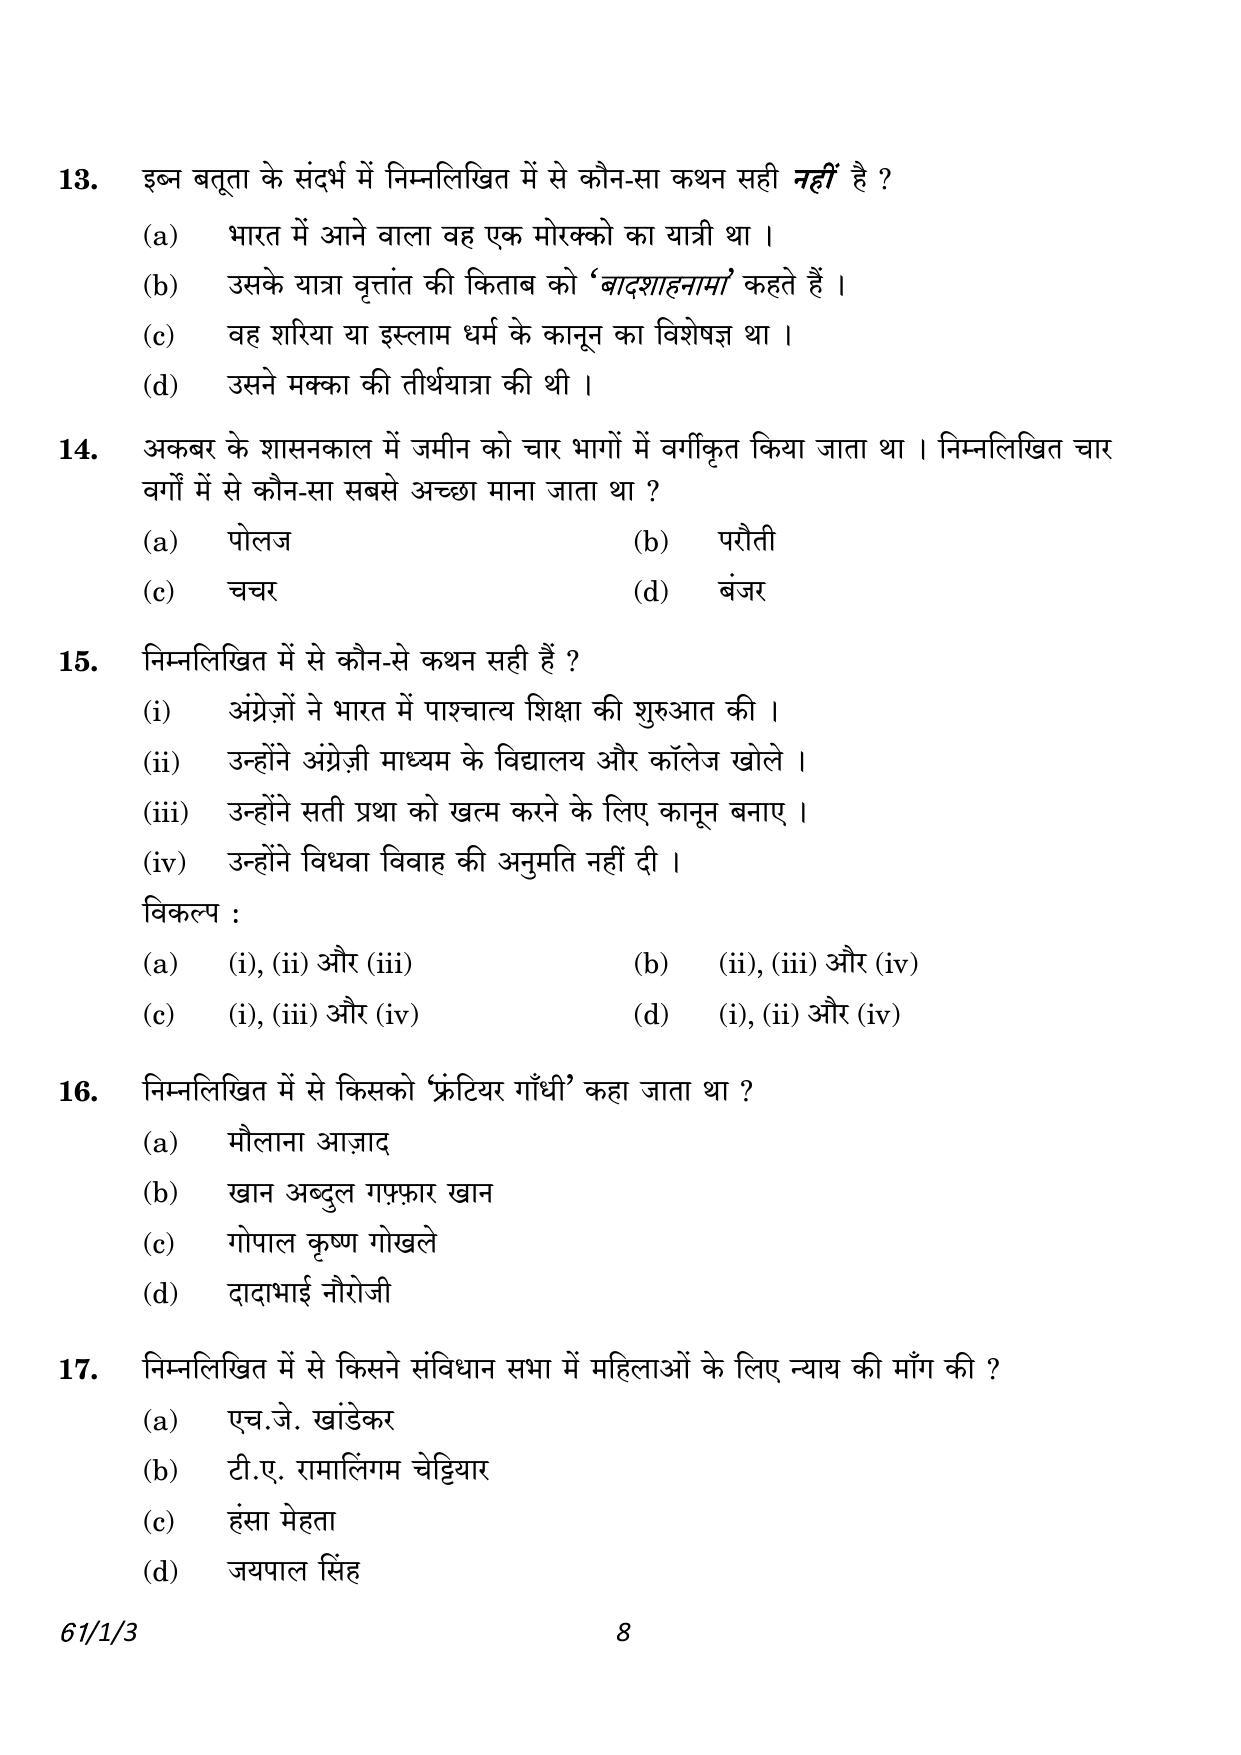 CBSE Class 12 61-1-3 History 2023 Question Paper - Page 8